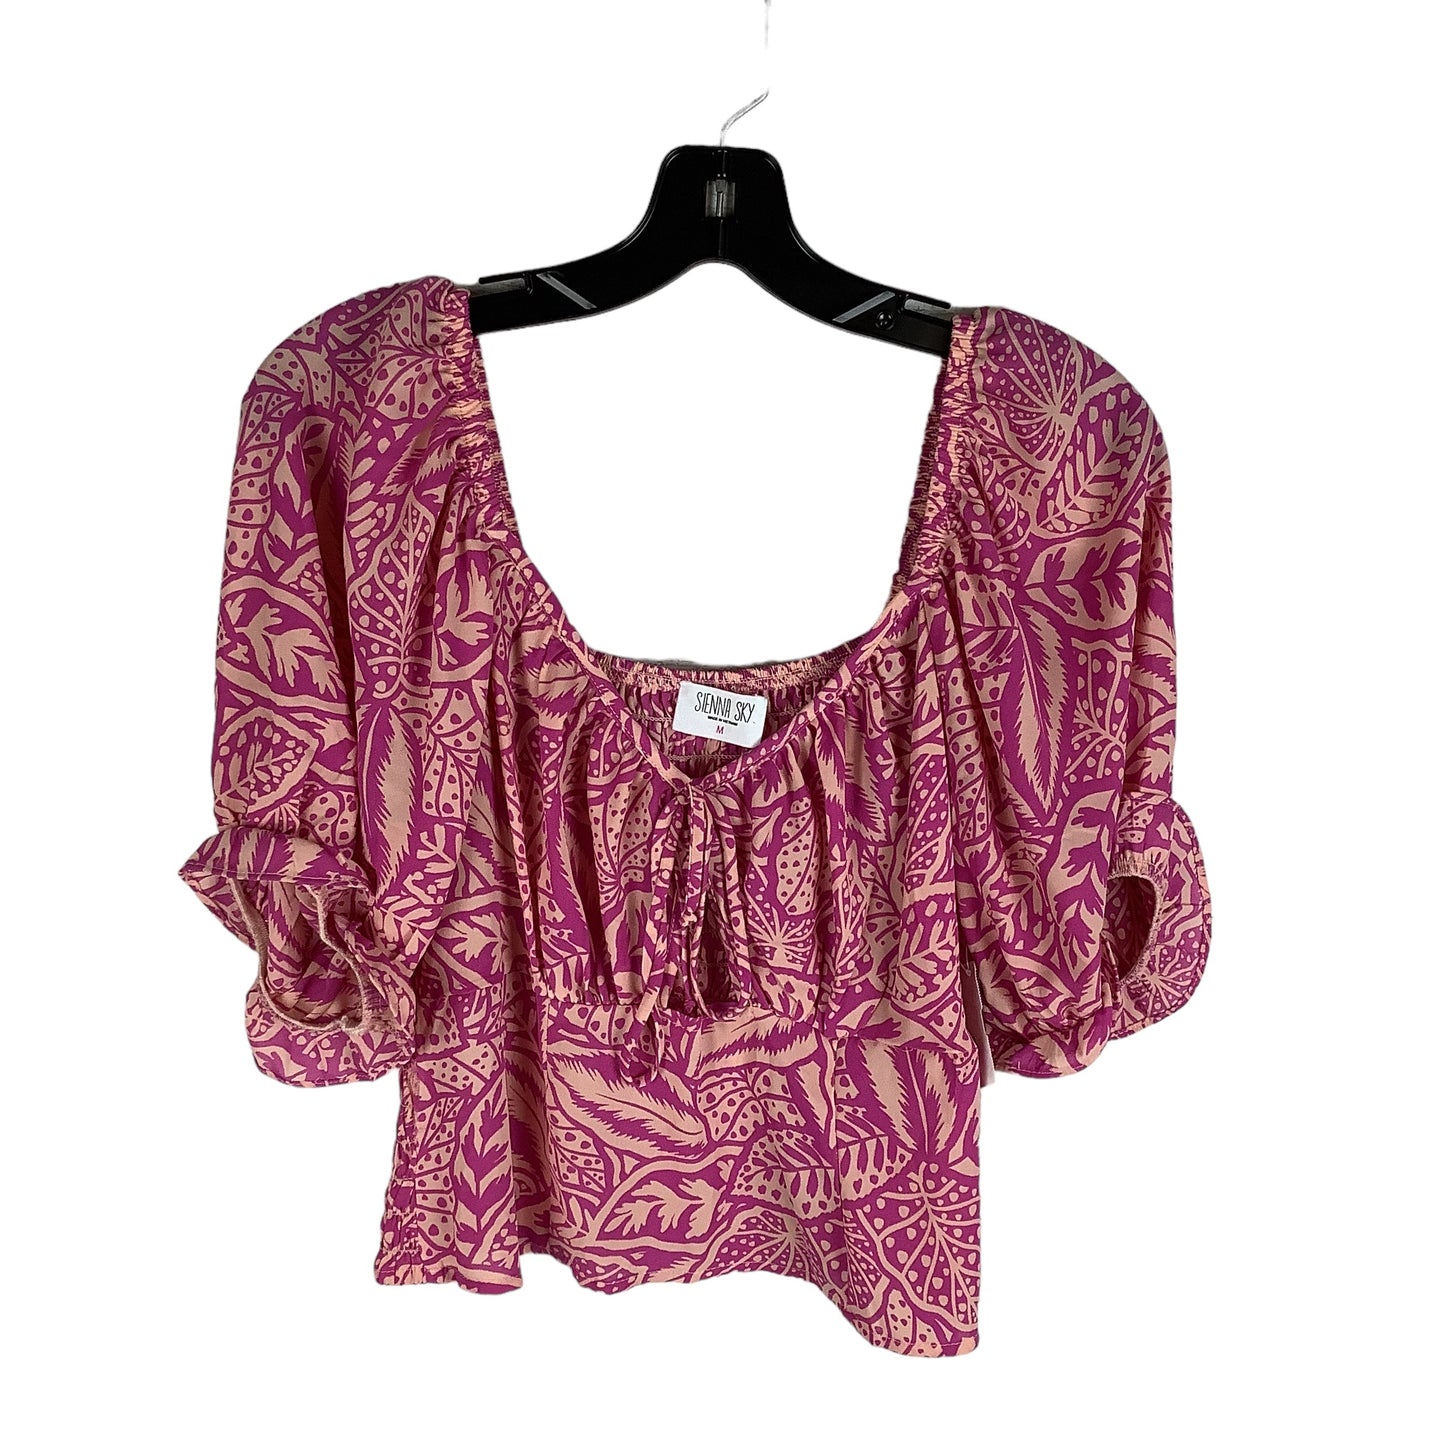 Pink Top Short Sleeve Sienna Sky, Size M